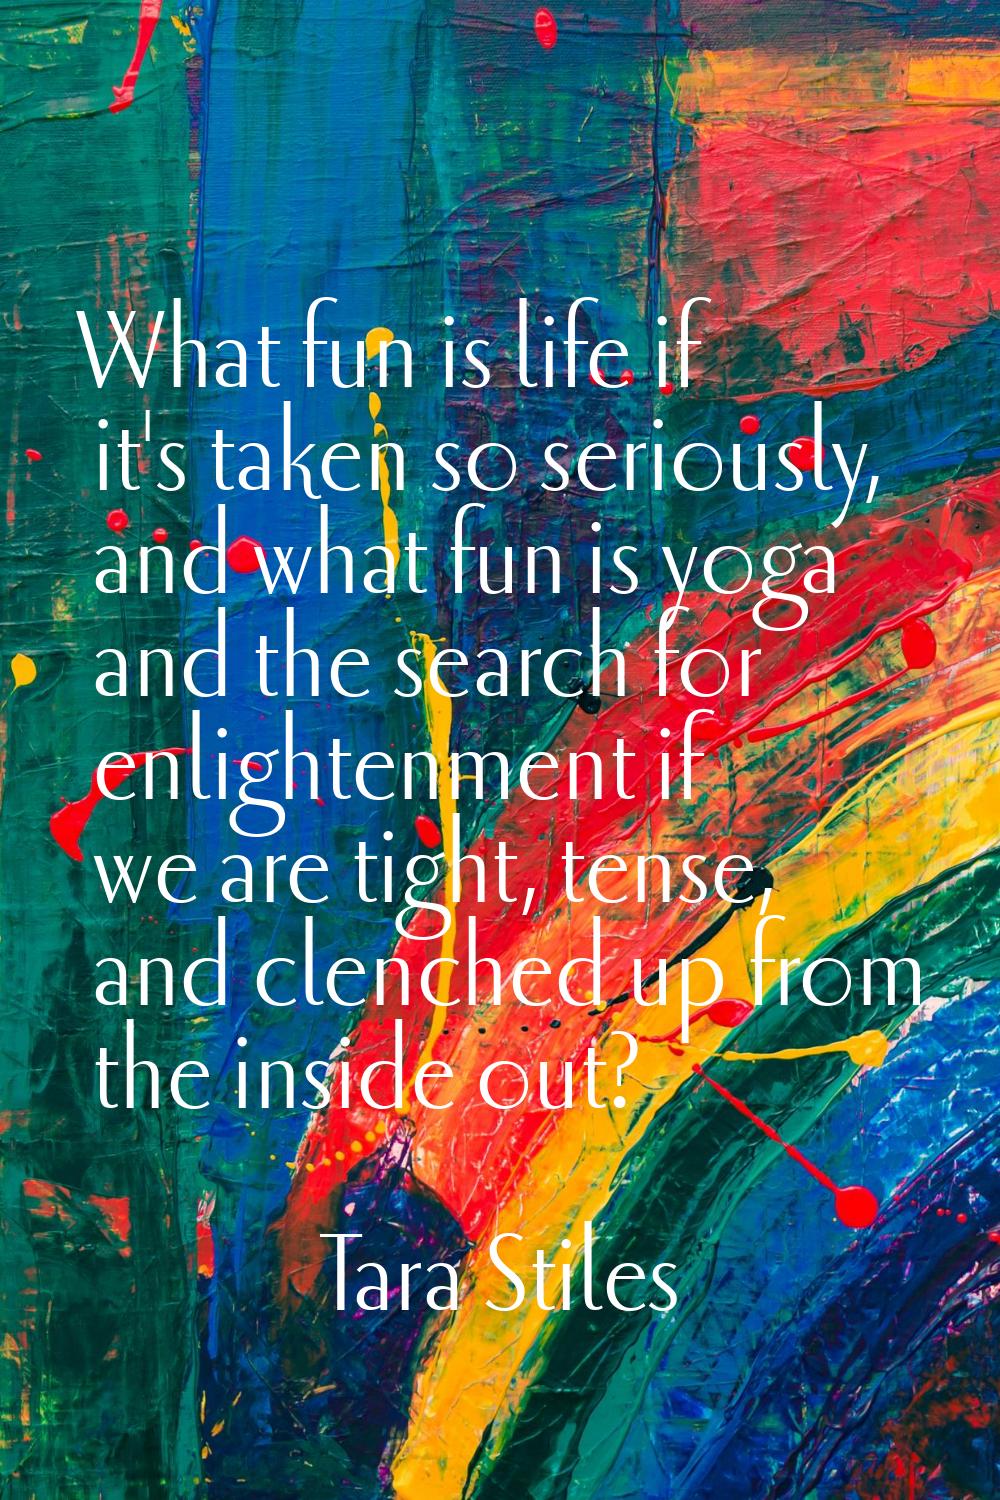 What fun is life if it's taken so seriously, and what fun is yoga and the search for enlightenment 